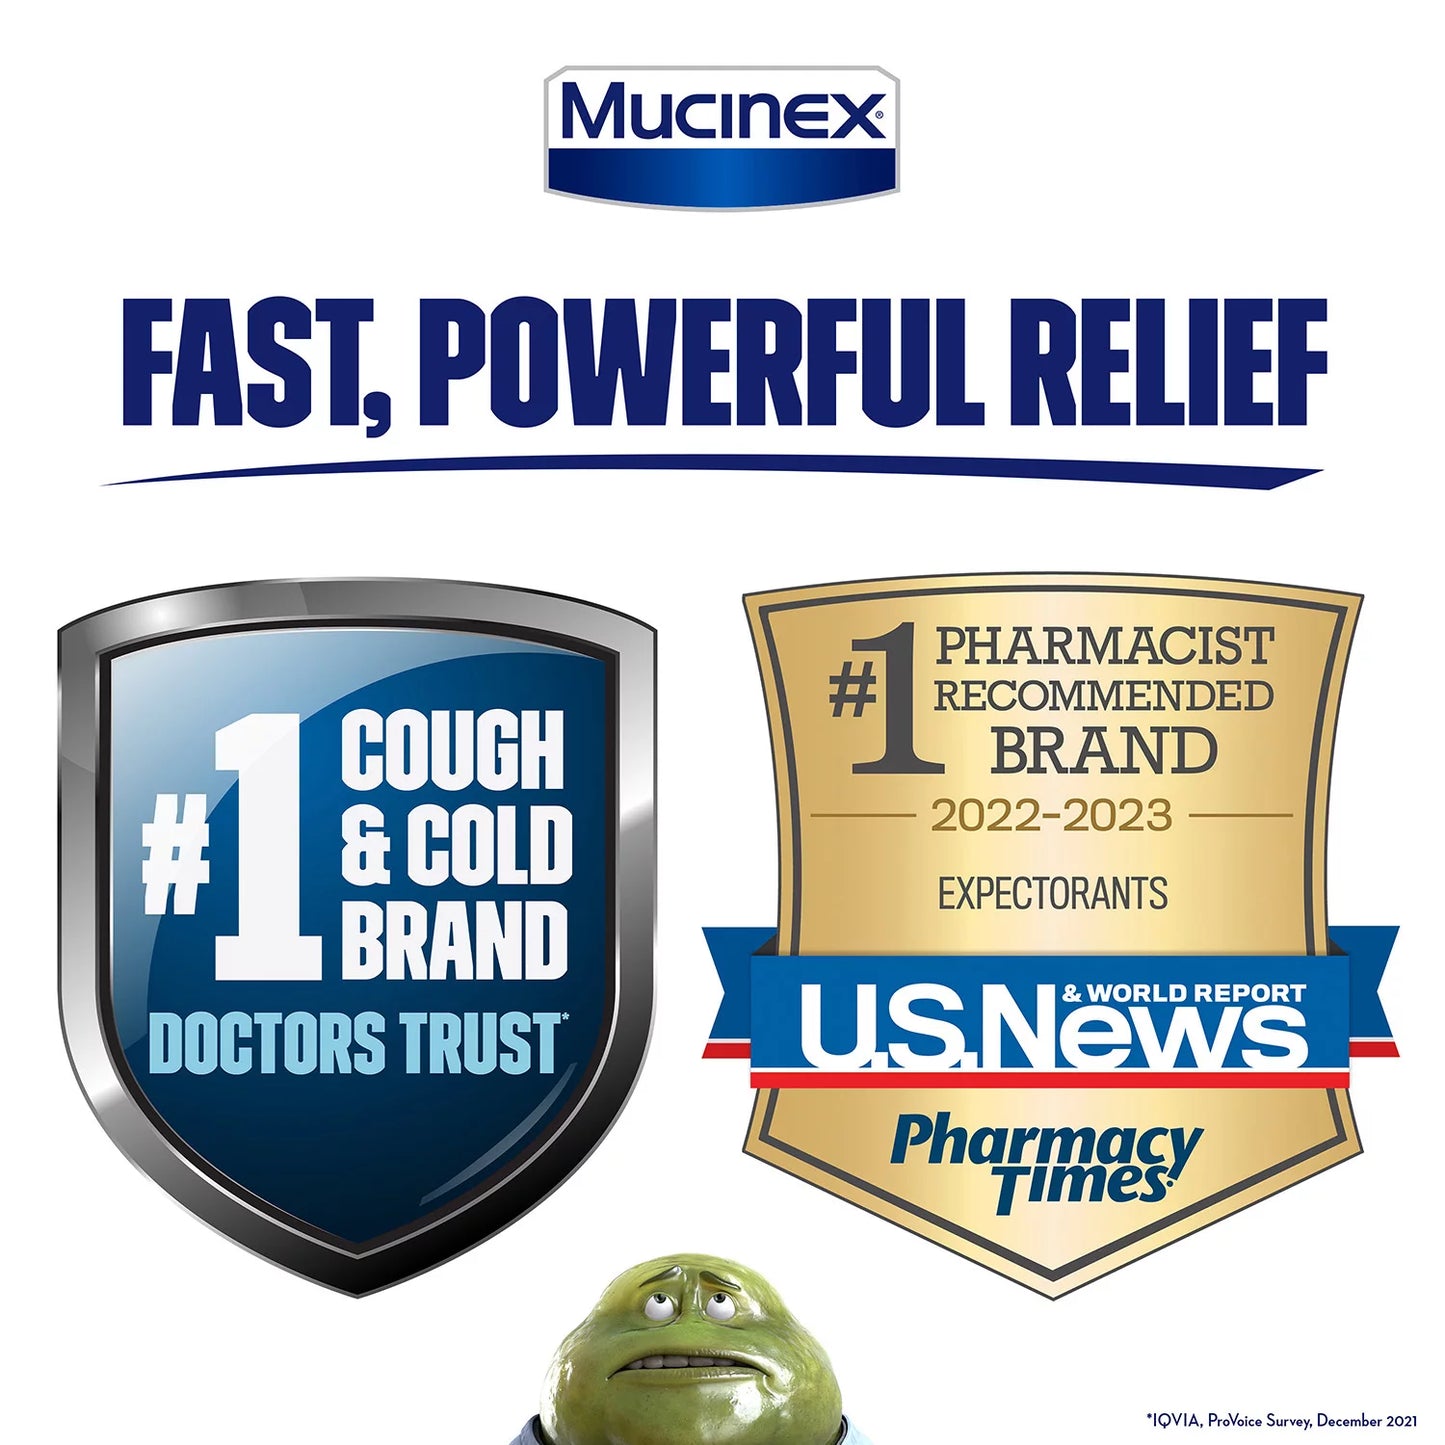 Mucinex DM 12 Hr Max Strength Expectorant & Cough Suppressant Tablets (56 ct.)